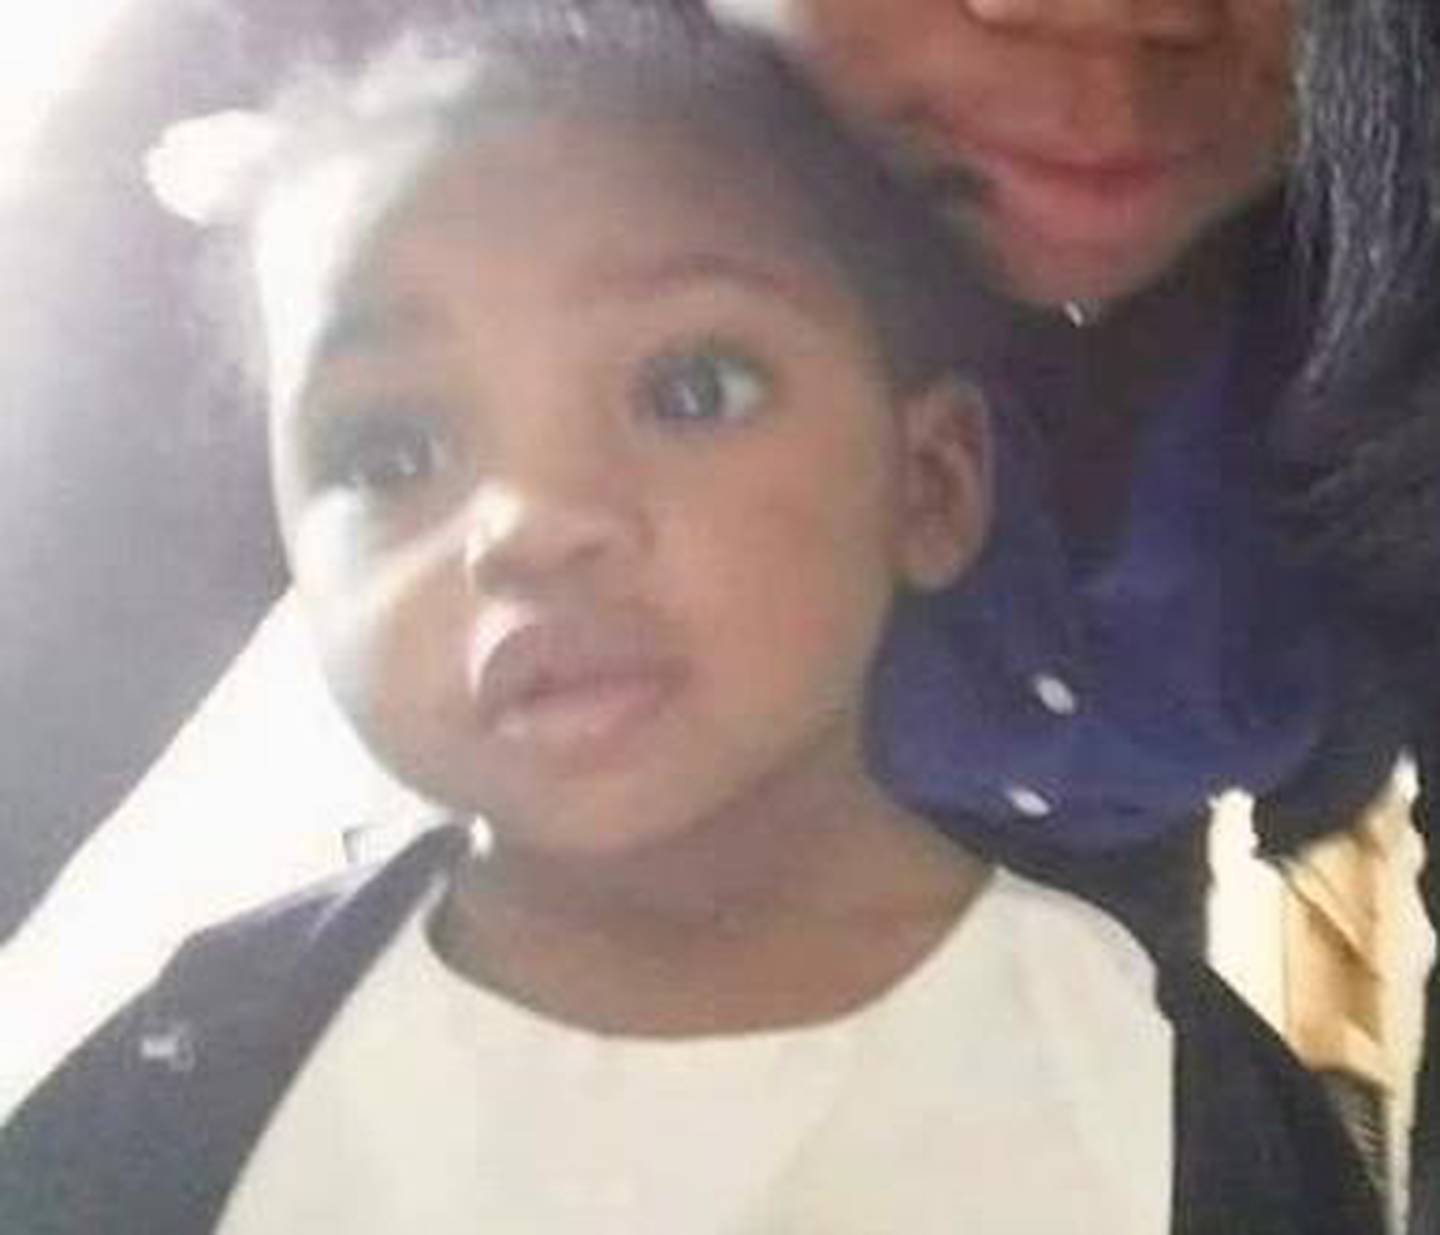 Sema'j Crosby, 1, was found dead midnight Thursday in her family's home in Preston Heights, after a more than 24-hour search.